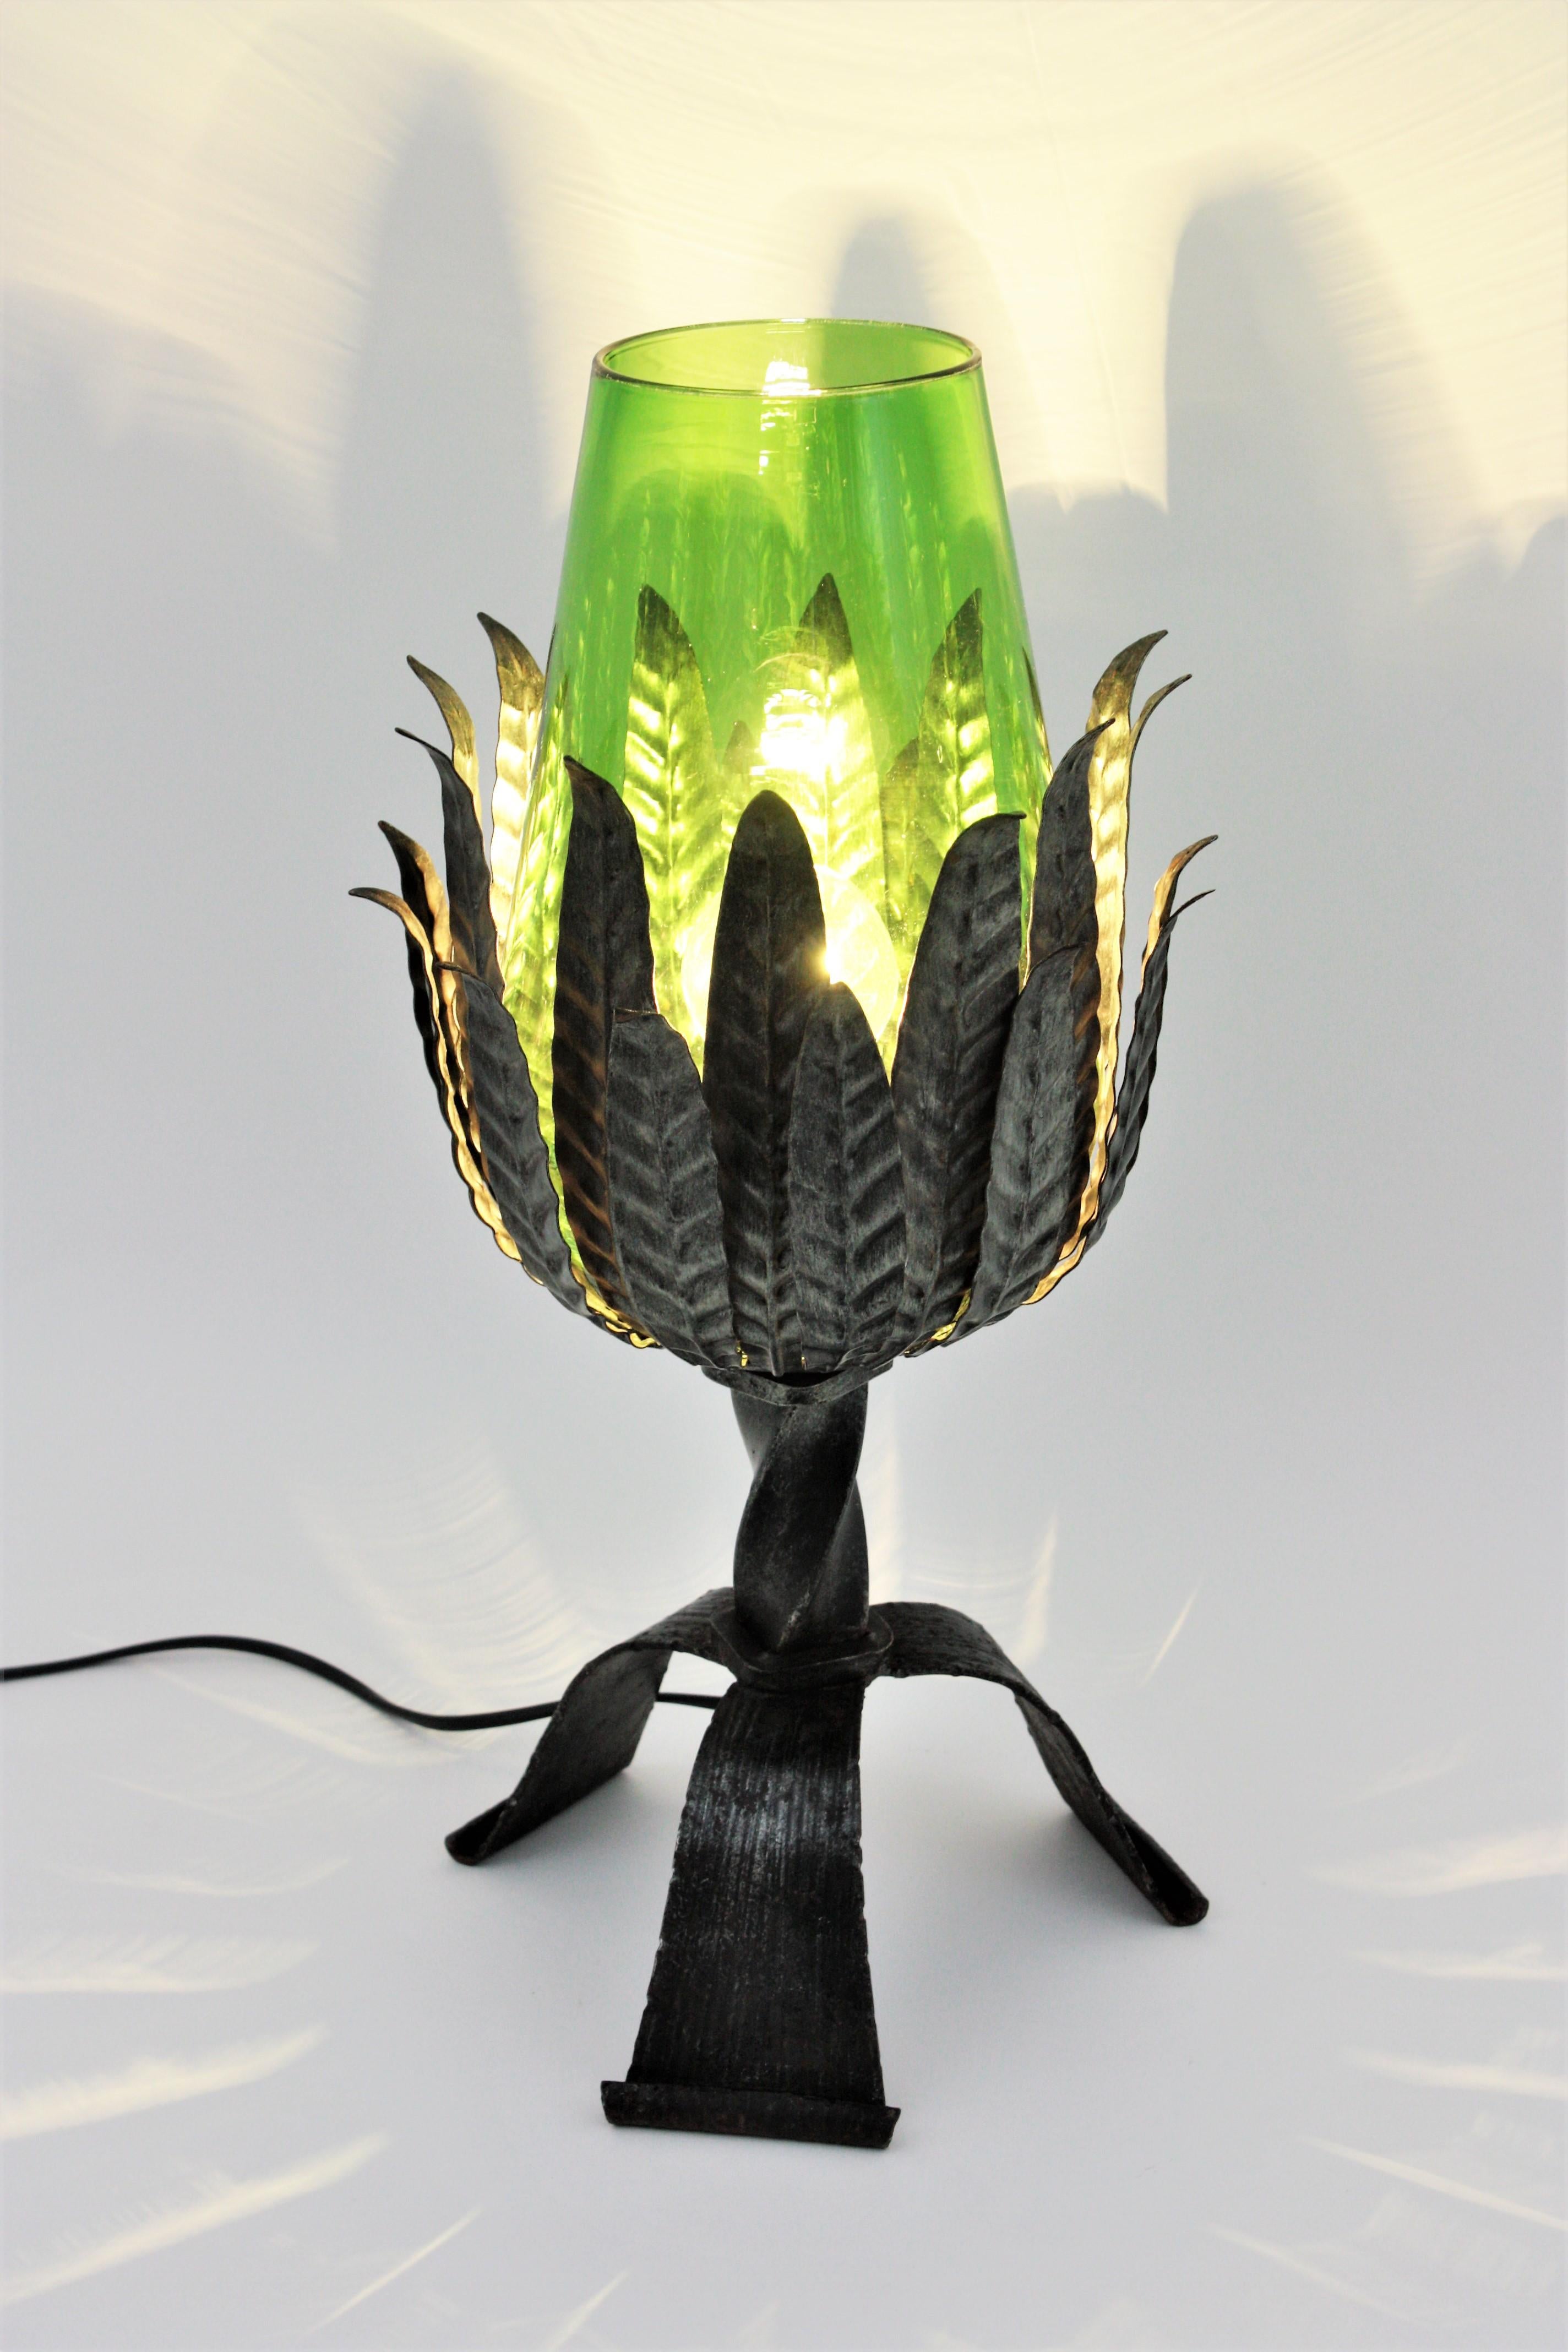 Spanish Table Lamp, Wrought Iron and Green Glass, 1950s For Sale 7